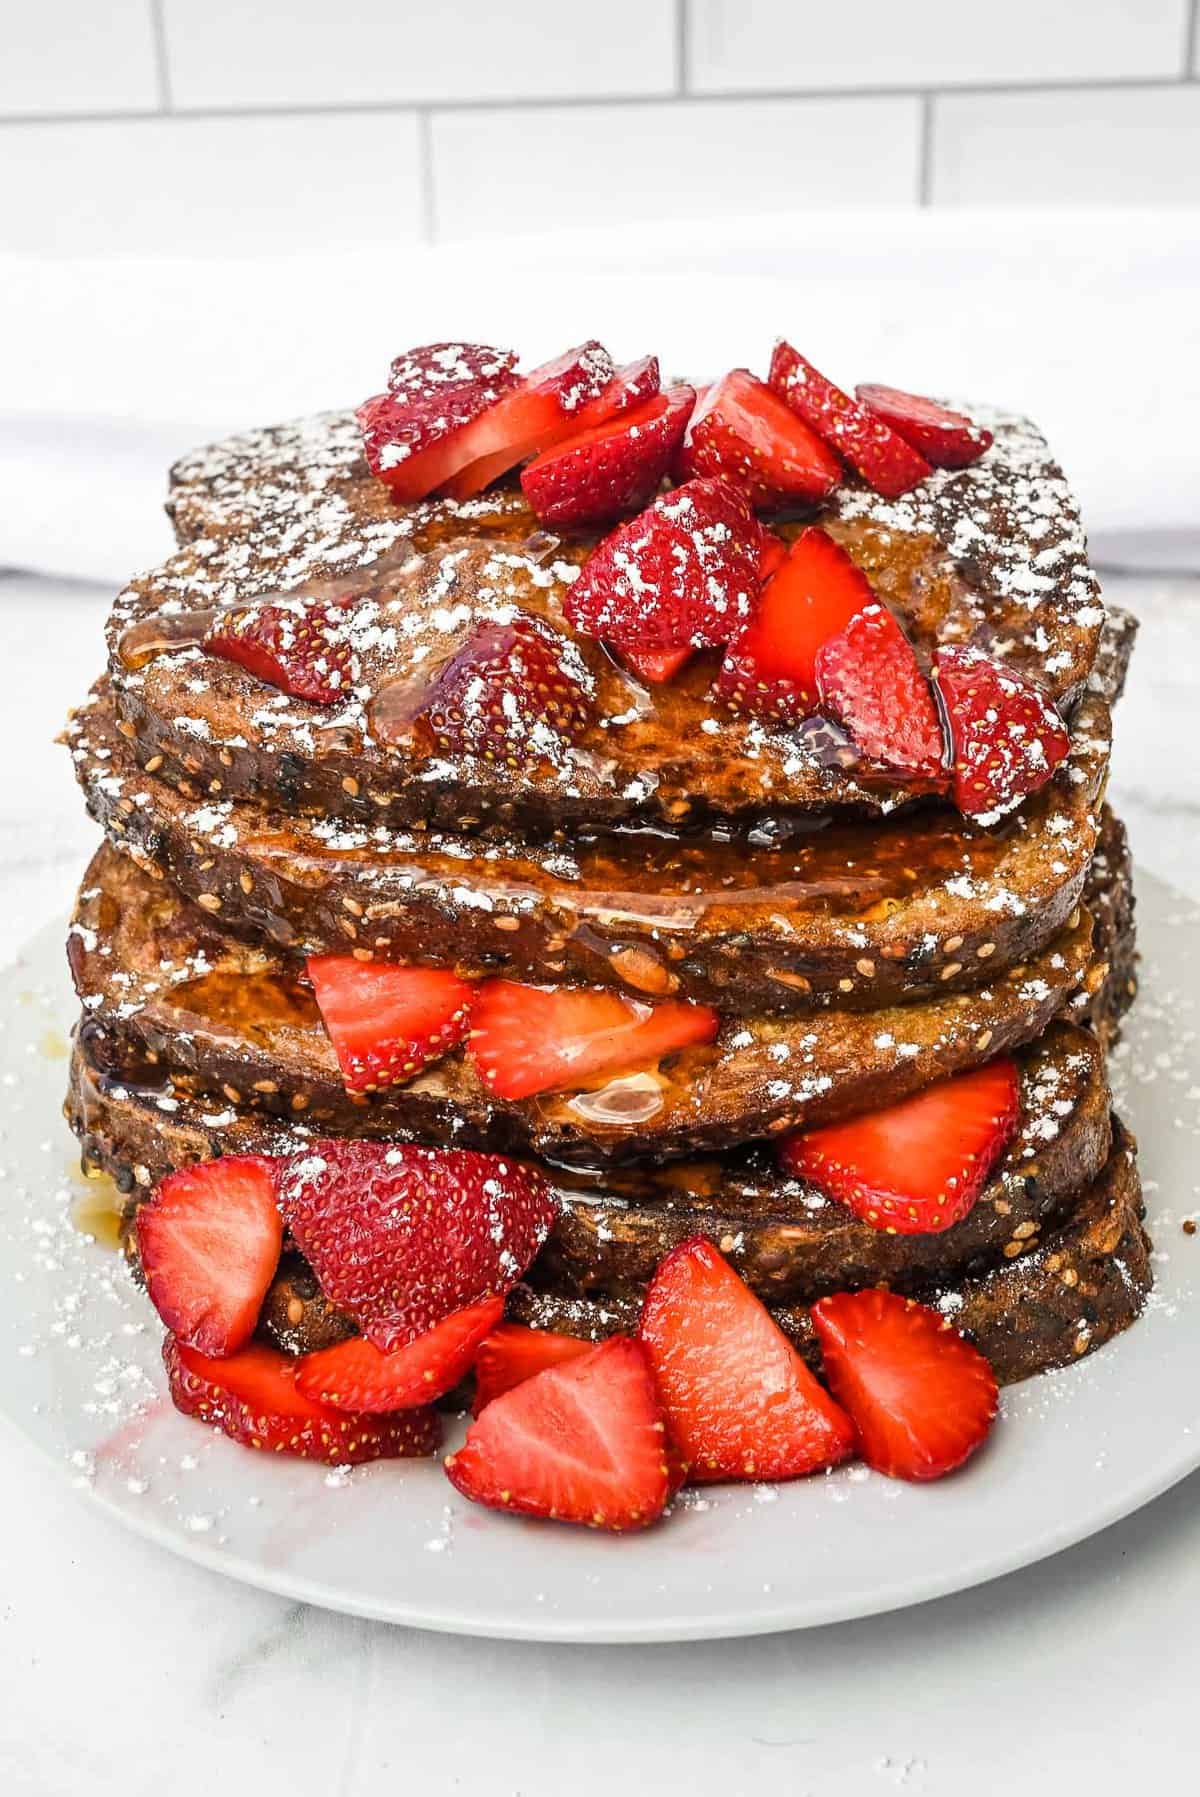 stack of dave's killer bread french toast topped with strawberries and powdered sugar on a white plate.